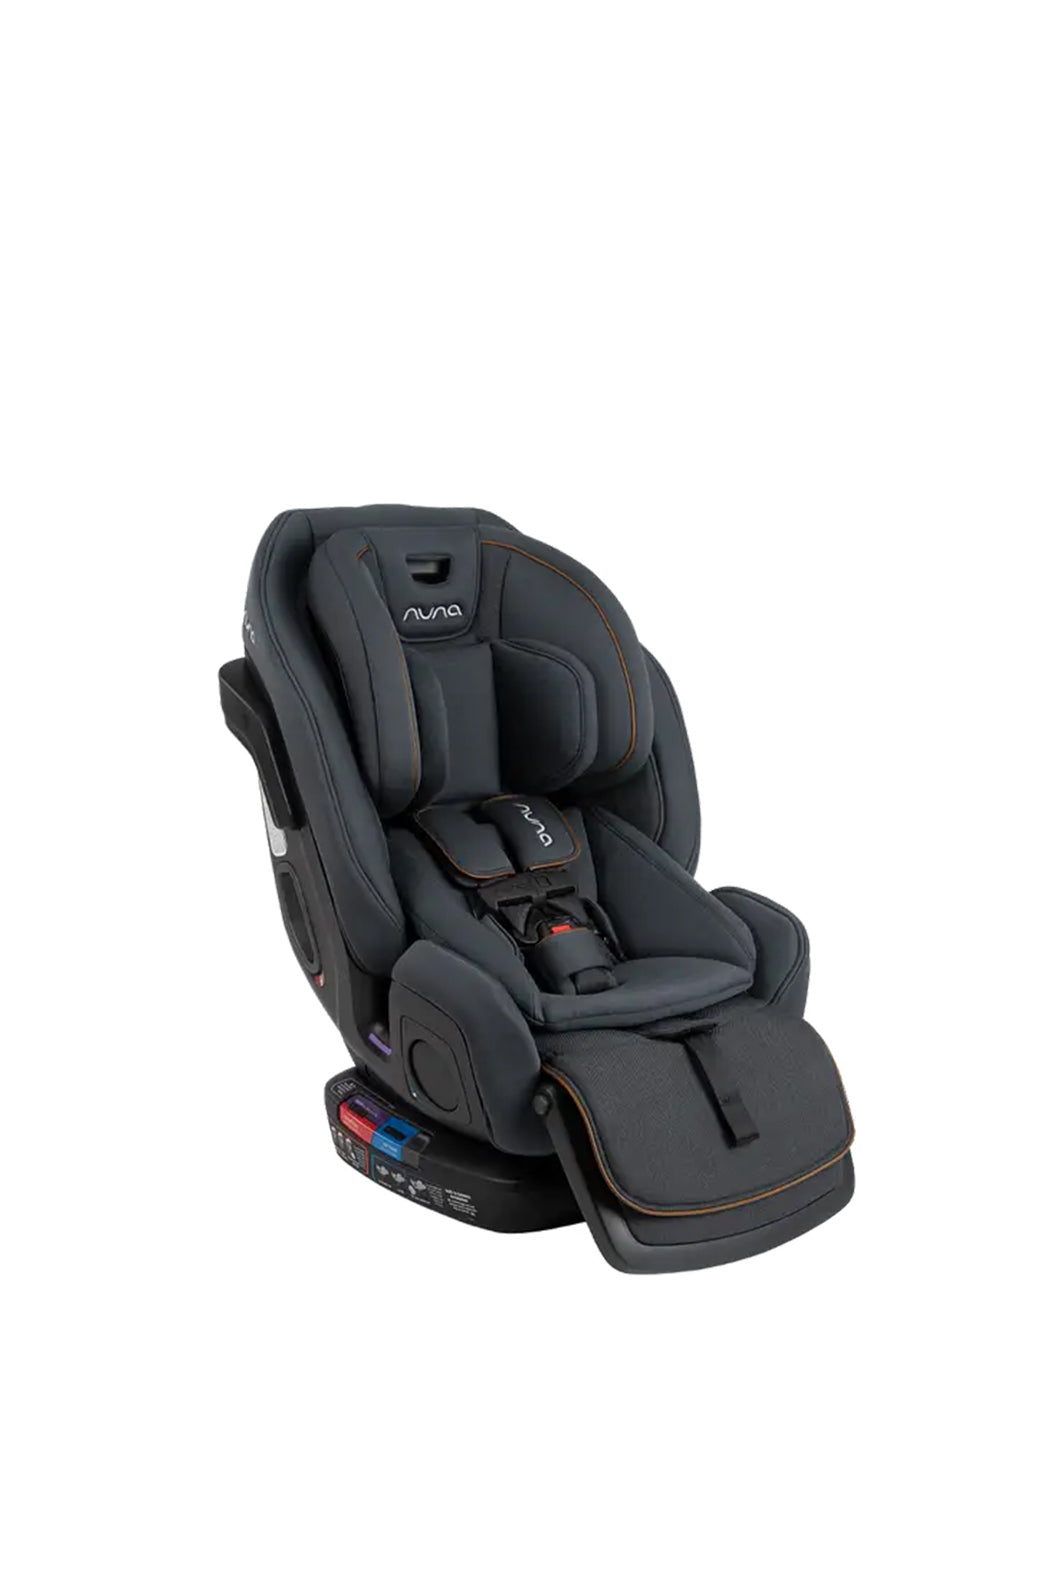 nuna Exec All-In-One & Convertible Car Seat